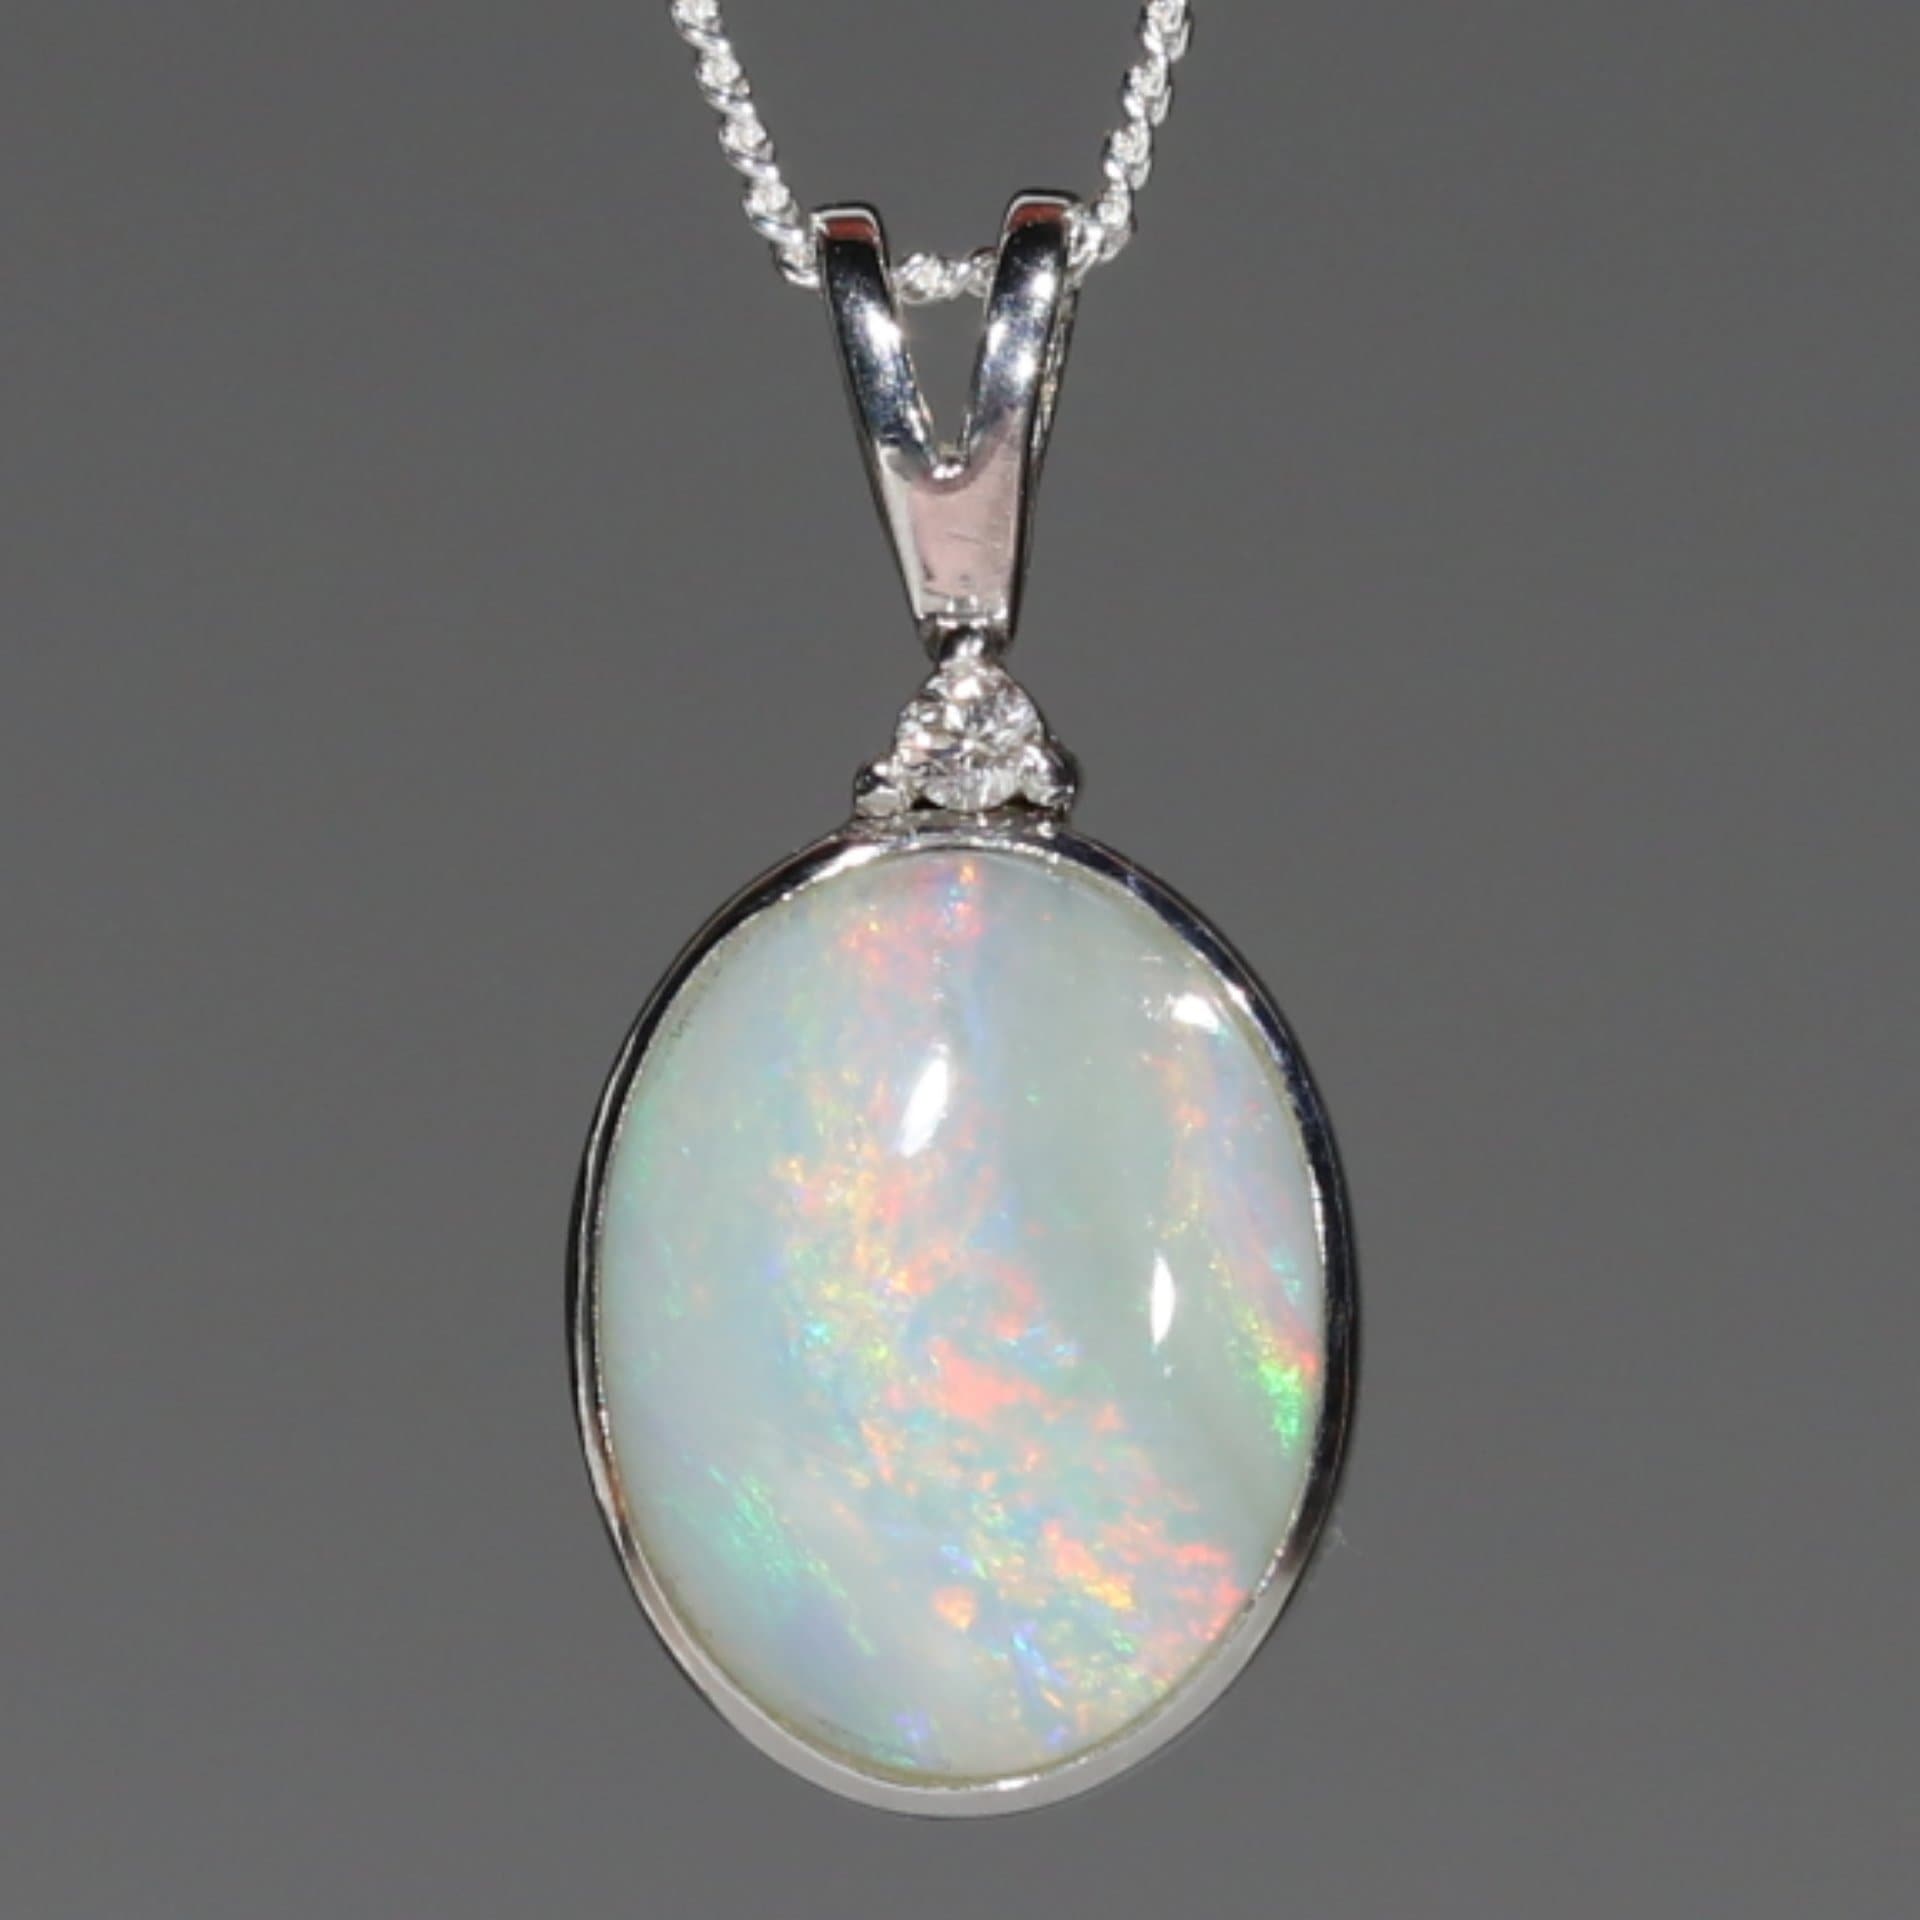 Real 925 Silver 1.5ct Fire Opal Pendant 7mm*9mm Natural Opal Necklace  Pendant for Party 18K Gold Plating Opal Jewelry - AliExpress